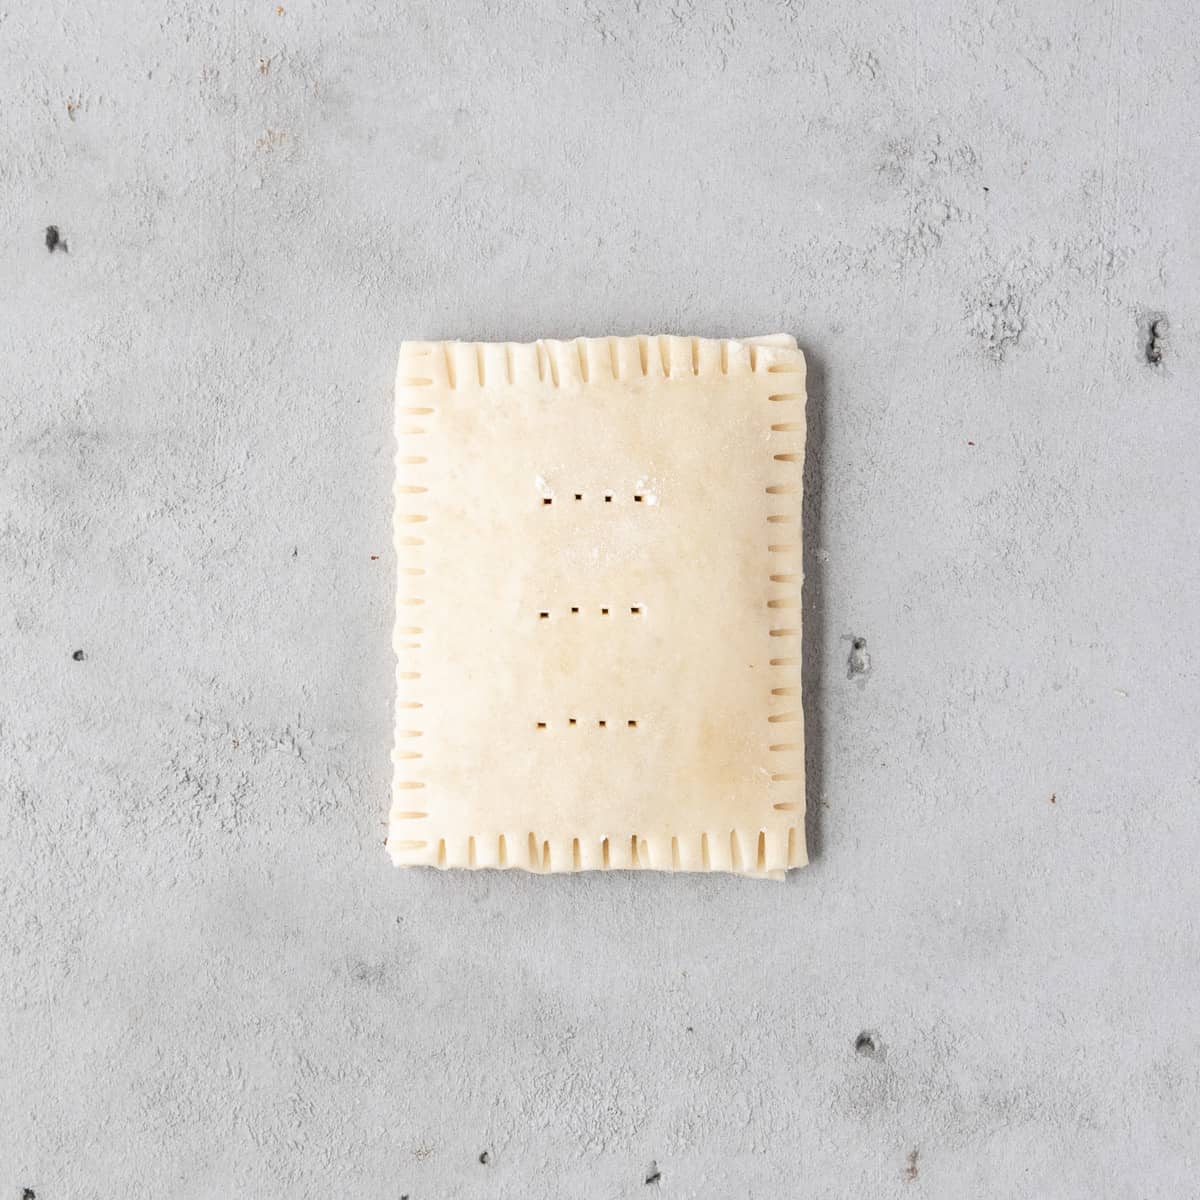 a blueberry pop tart before being baked on a grey background.